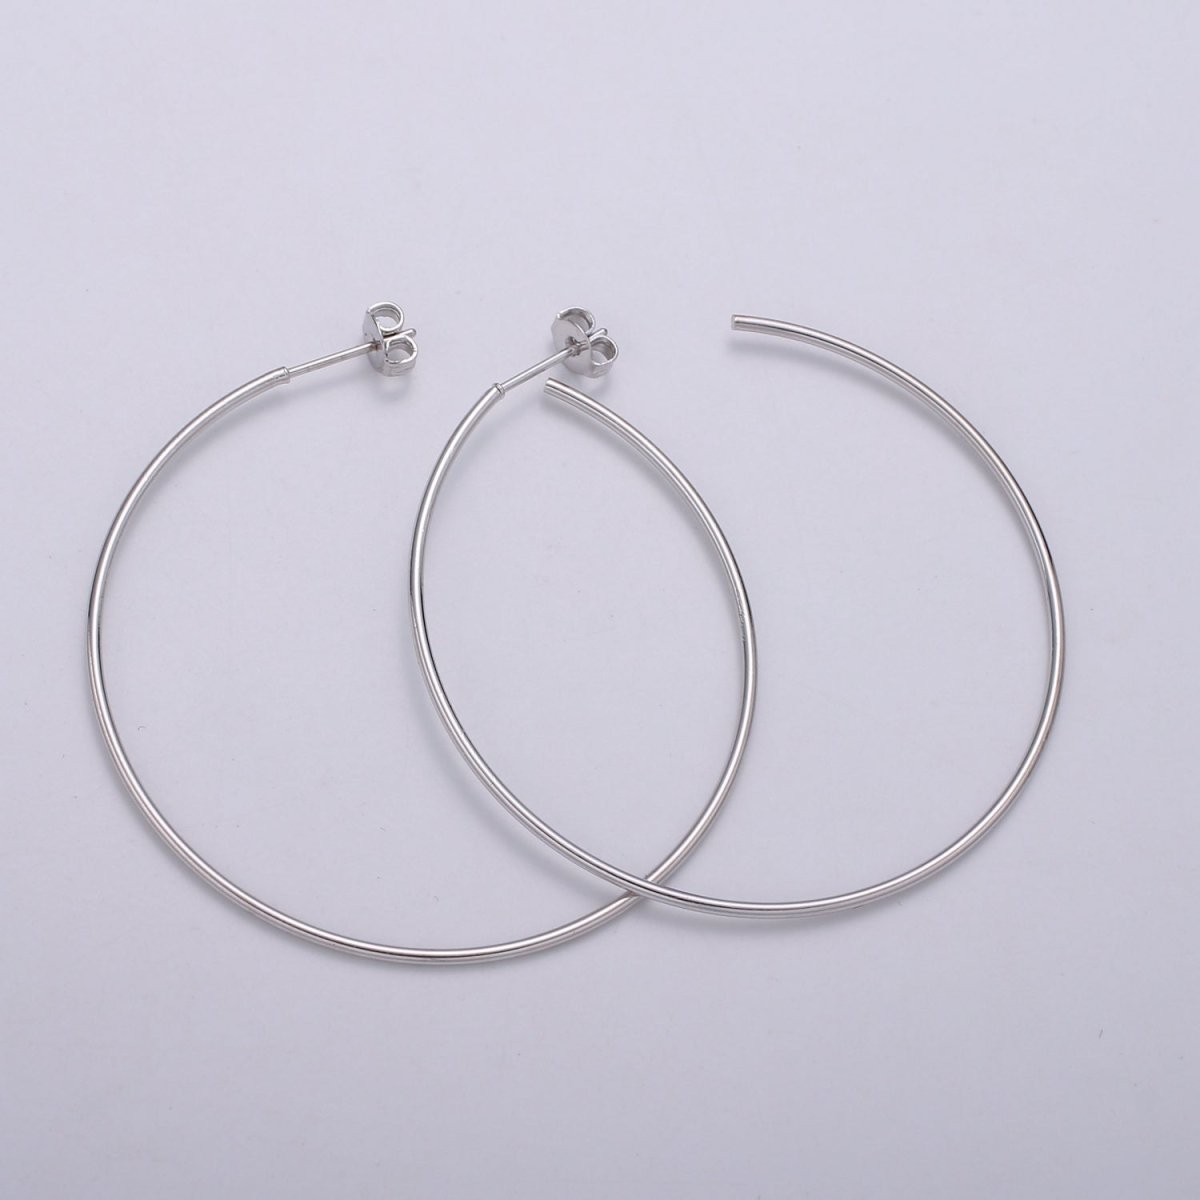 50 mm Simple Light Hoops 24K Gold, Loop Gold Earrings for DIY Earring Craft Supply Jewelry Making, Q-412 Q-413 - DLUXCA